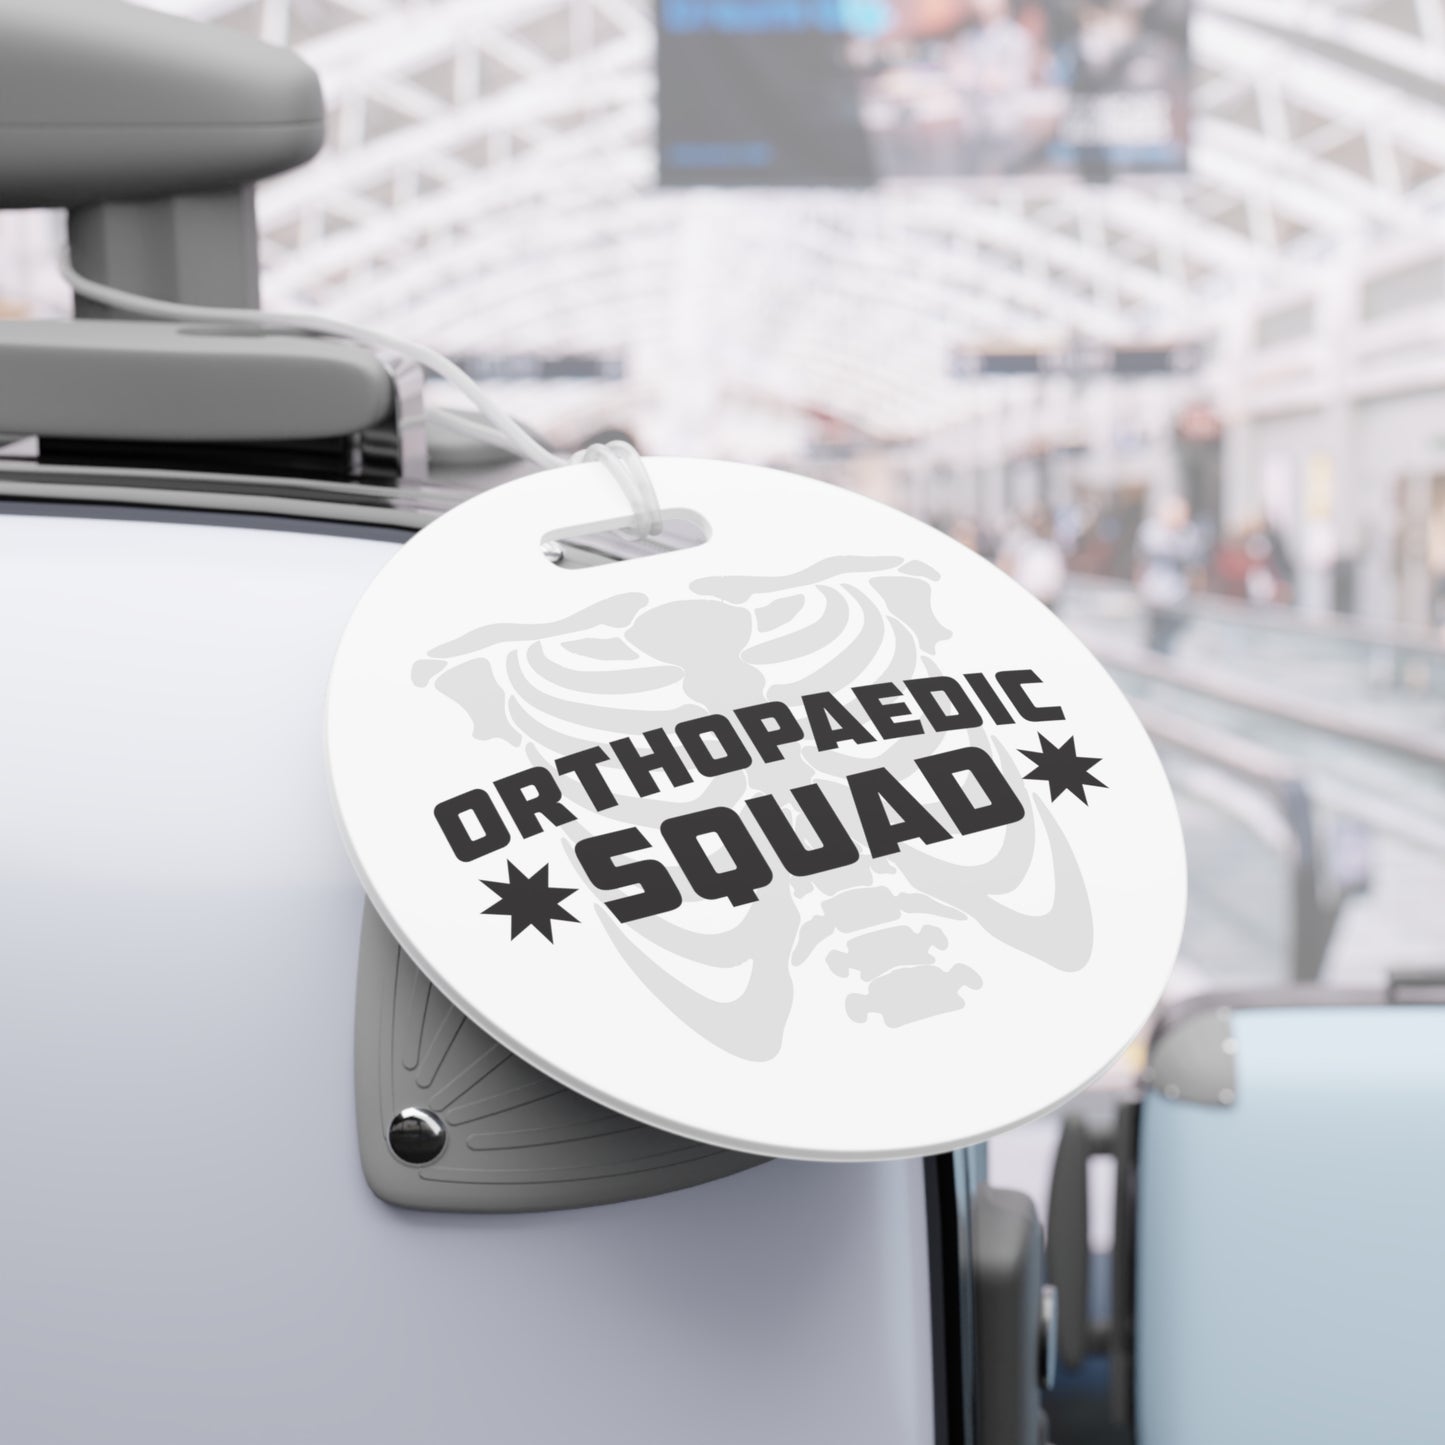 AOPT Luggage Tags